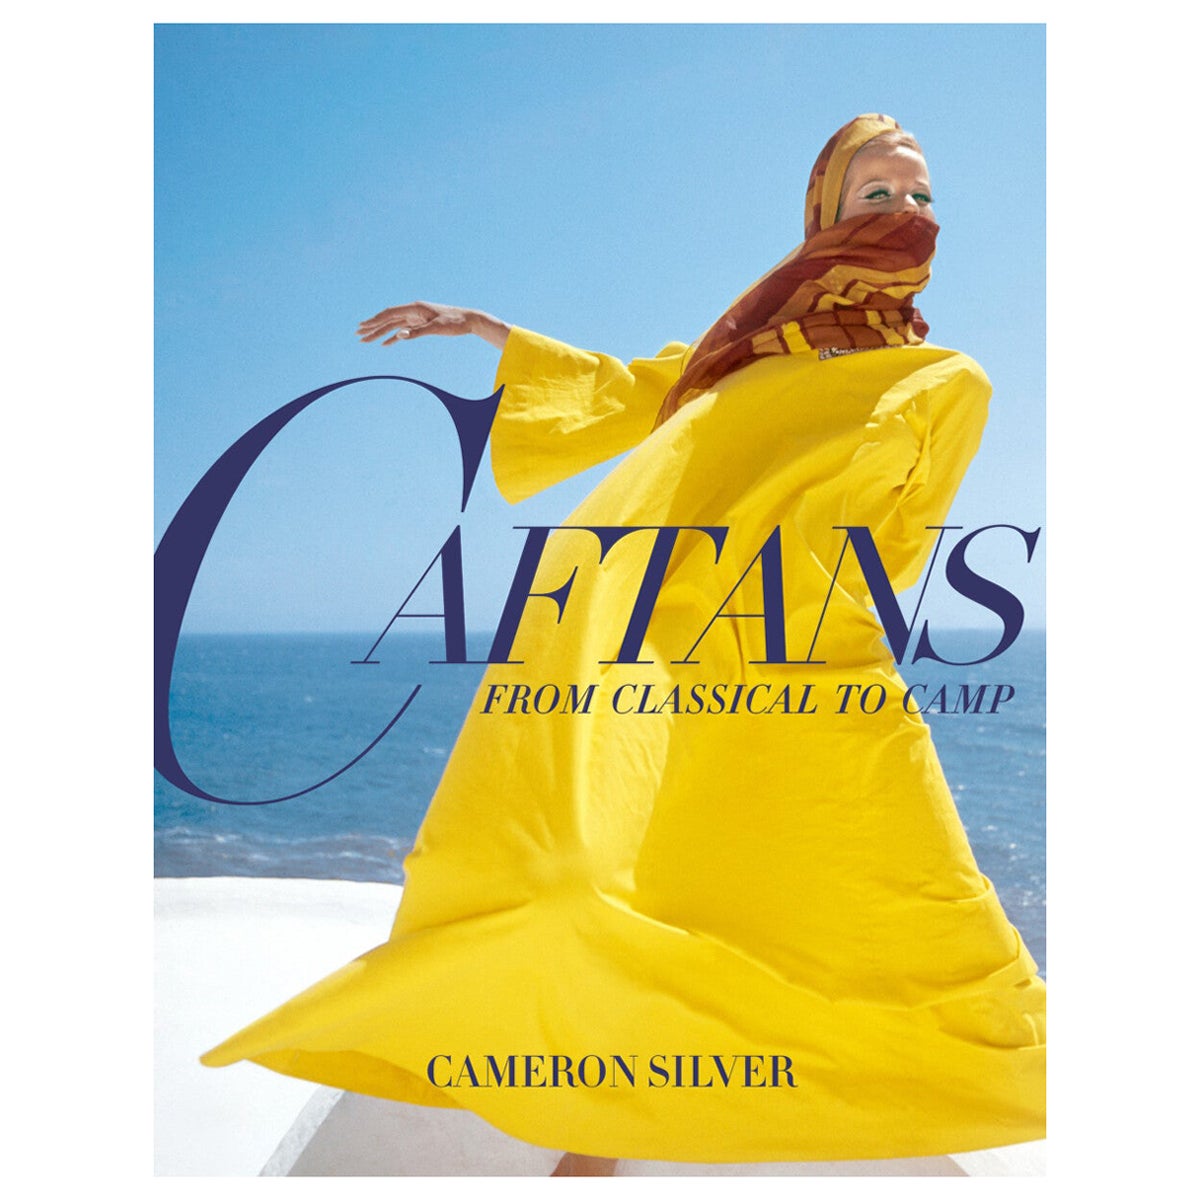 Caftans From Classical to Camp Book by Cameron Silver